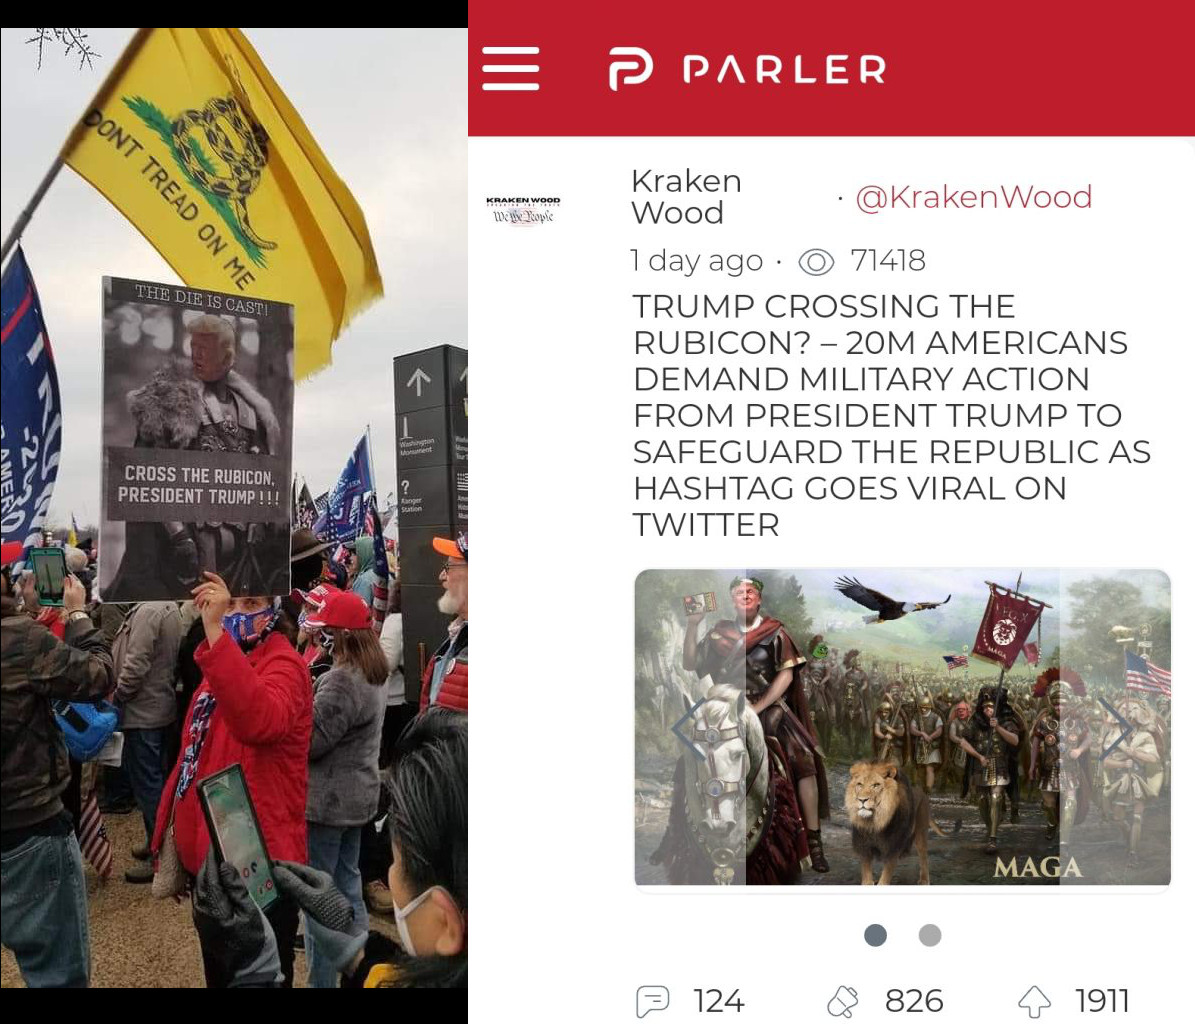 A screenshot of a post on Parler. The text of the post reads "TRUMP CROSSING THE RUBICON? - 20M AMERICANS DEMAND MILITARY ACTION FROM PRESIDENT TRUMP TO SAFEGUARD THE REPUBLIC AS HASHTAG GOES VIRAL ON TWITTER" and the attached image is a stylized picture of a similing Donald Trump in Roman armor, riding a horse and followed by a lion leading a Roman army bearing both Roman and American flags.

On the left is a photograph of a January 6th rioter carrying a sign that says "THE DIE IS CAST! CROSS THE RUBICON, PRESIDENT TRUMP!!!"